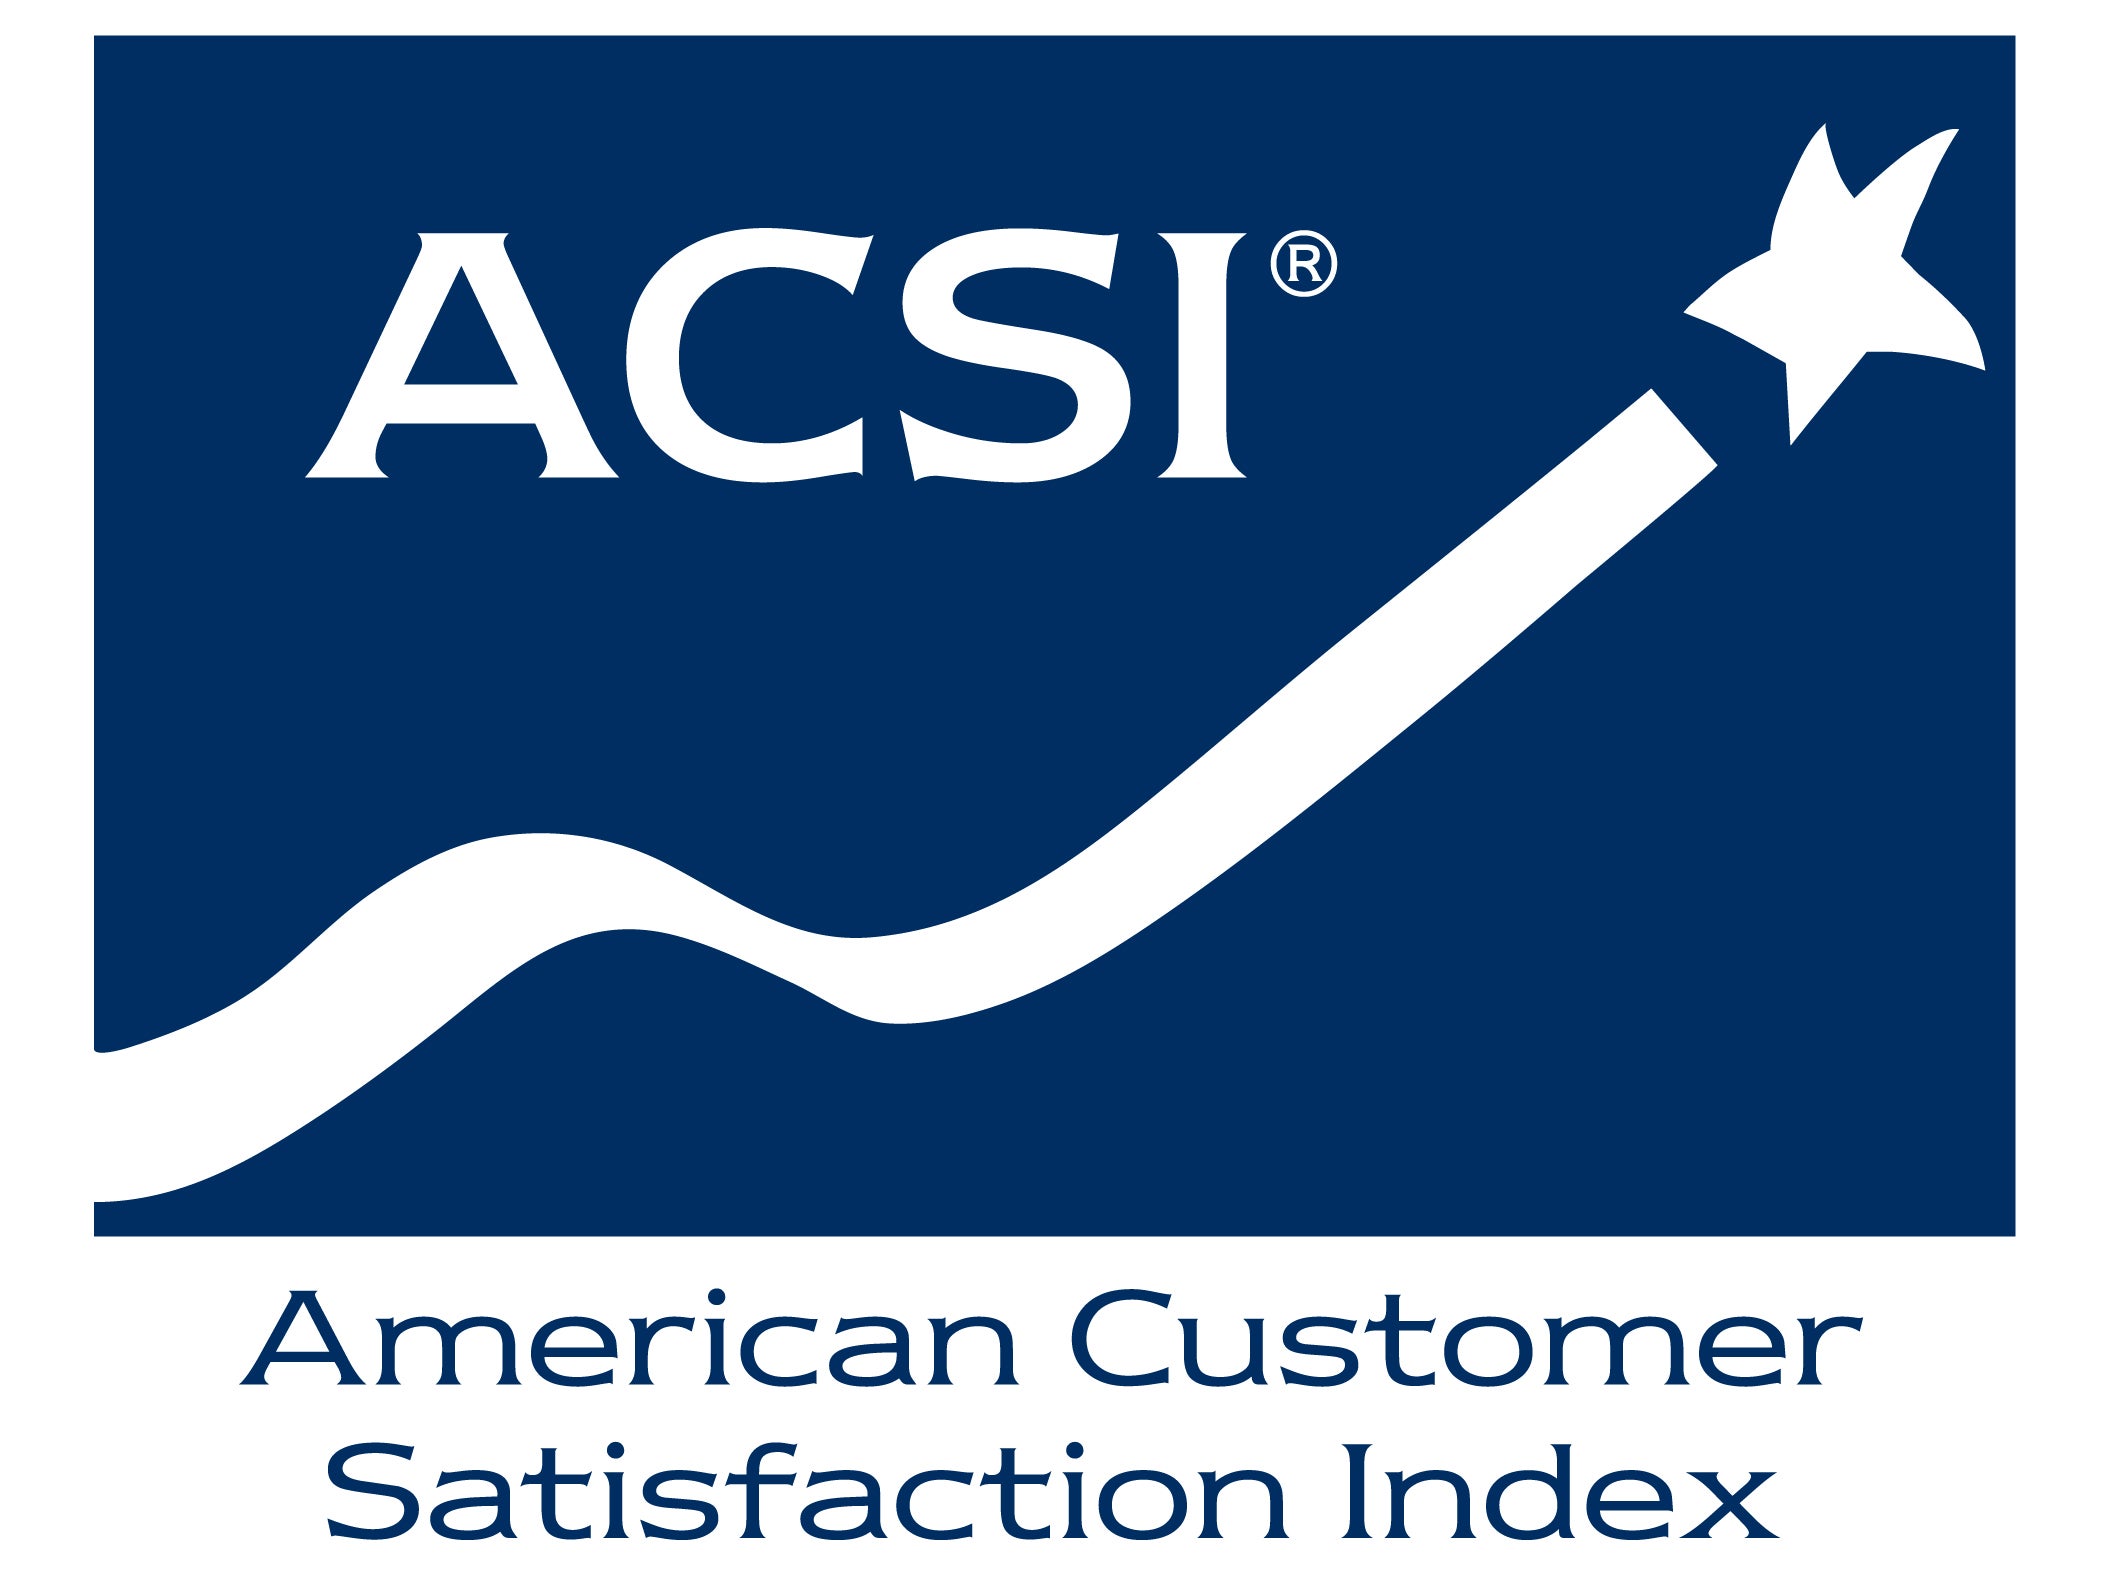 The ACSI - American Customer Satisfaction Index - is is the only national cross-industry measure of customer satisfaction in the United States. Each year, the ACSI uses data from interviews with roughly 300,000 customers as inputs to an econometric model for analyzing customer satisfaction with more than 400 companies in 46 industries and 10 economic sectors.